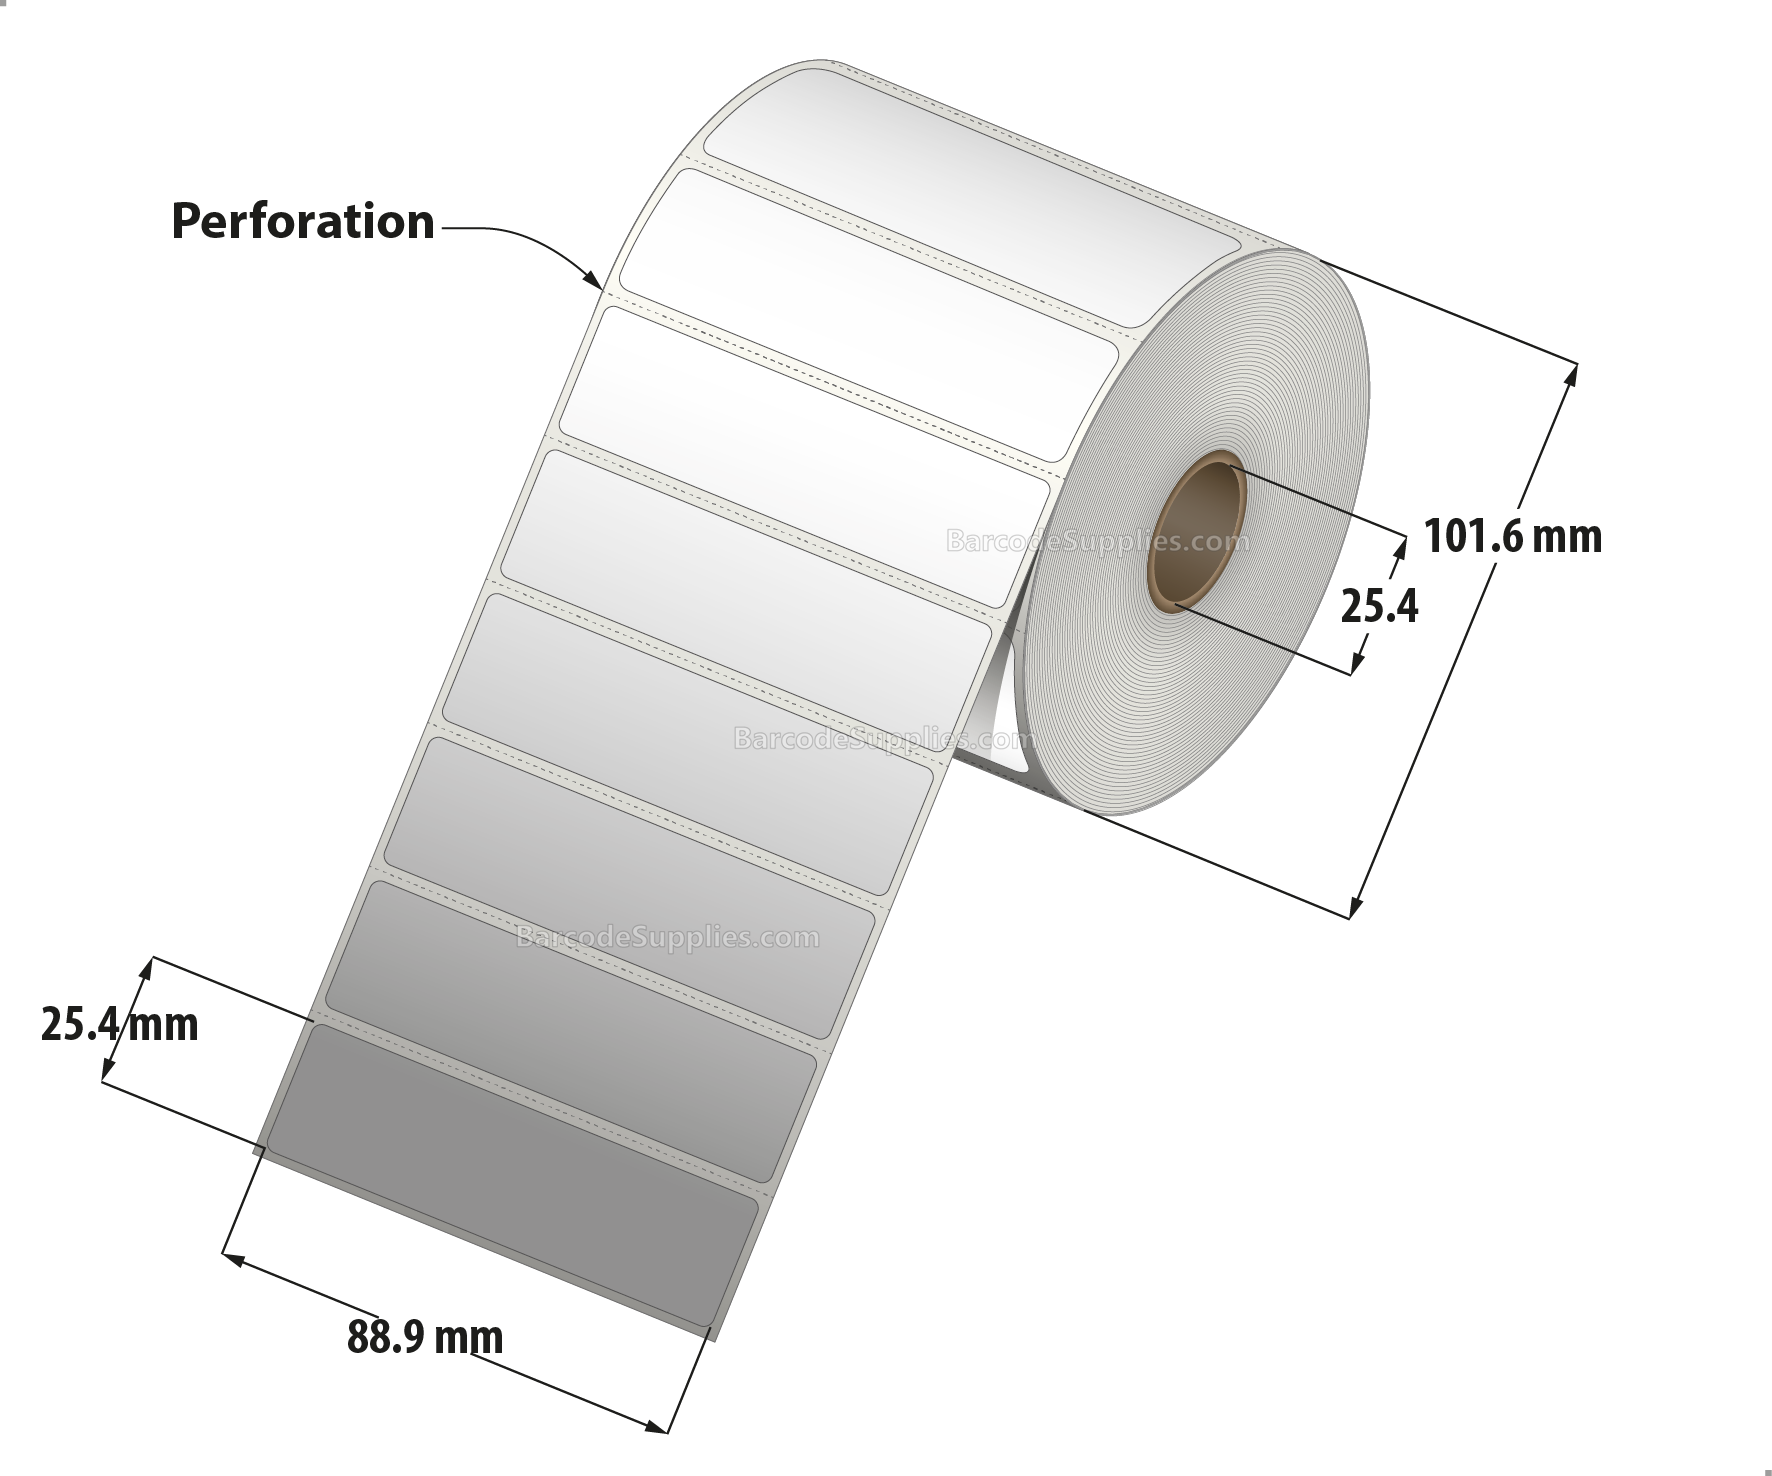 3.5 x 1 Direct Thermal White Labels With Acrylic Adhesive - Perforated - 1375 Labels Per Roll - Carton Of 12 Rolls - 16500 Labels Total - MPN: RD-35-1-1375-1